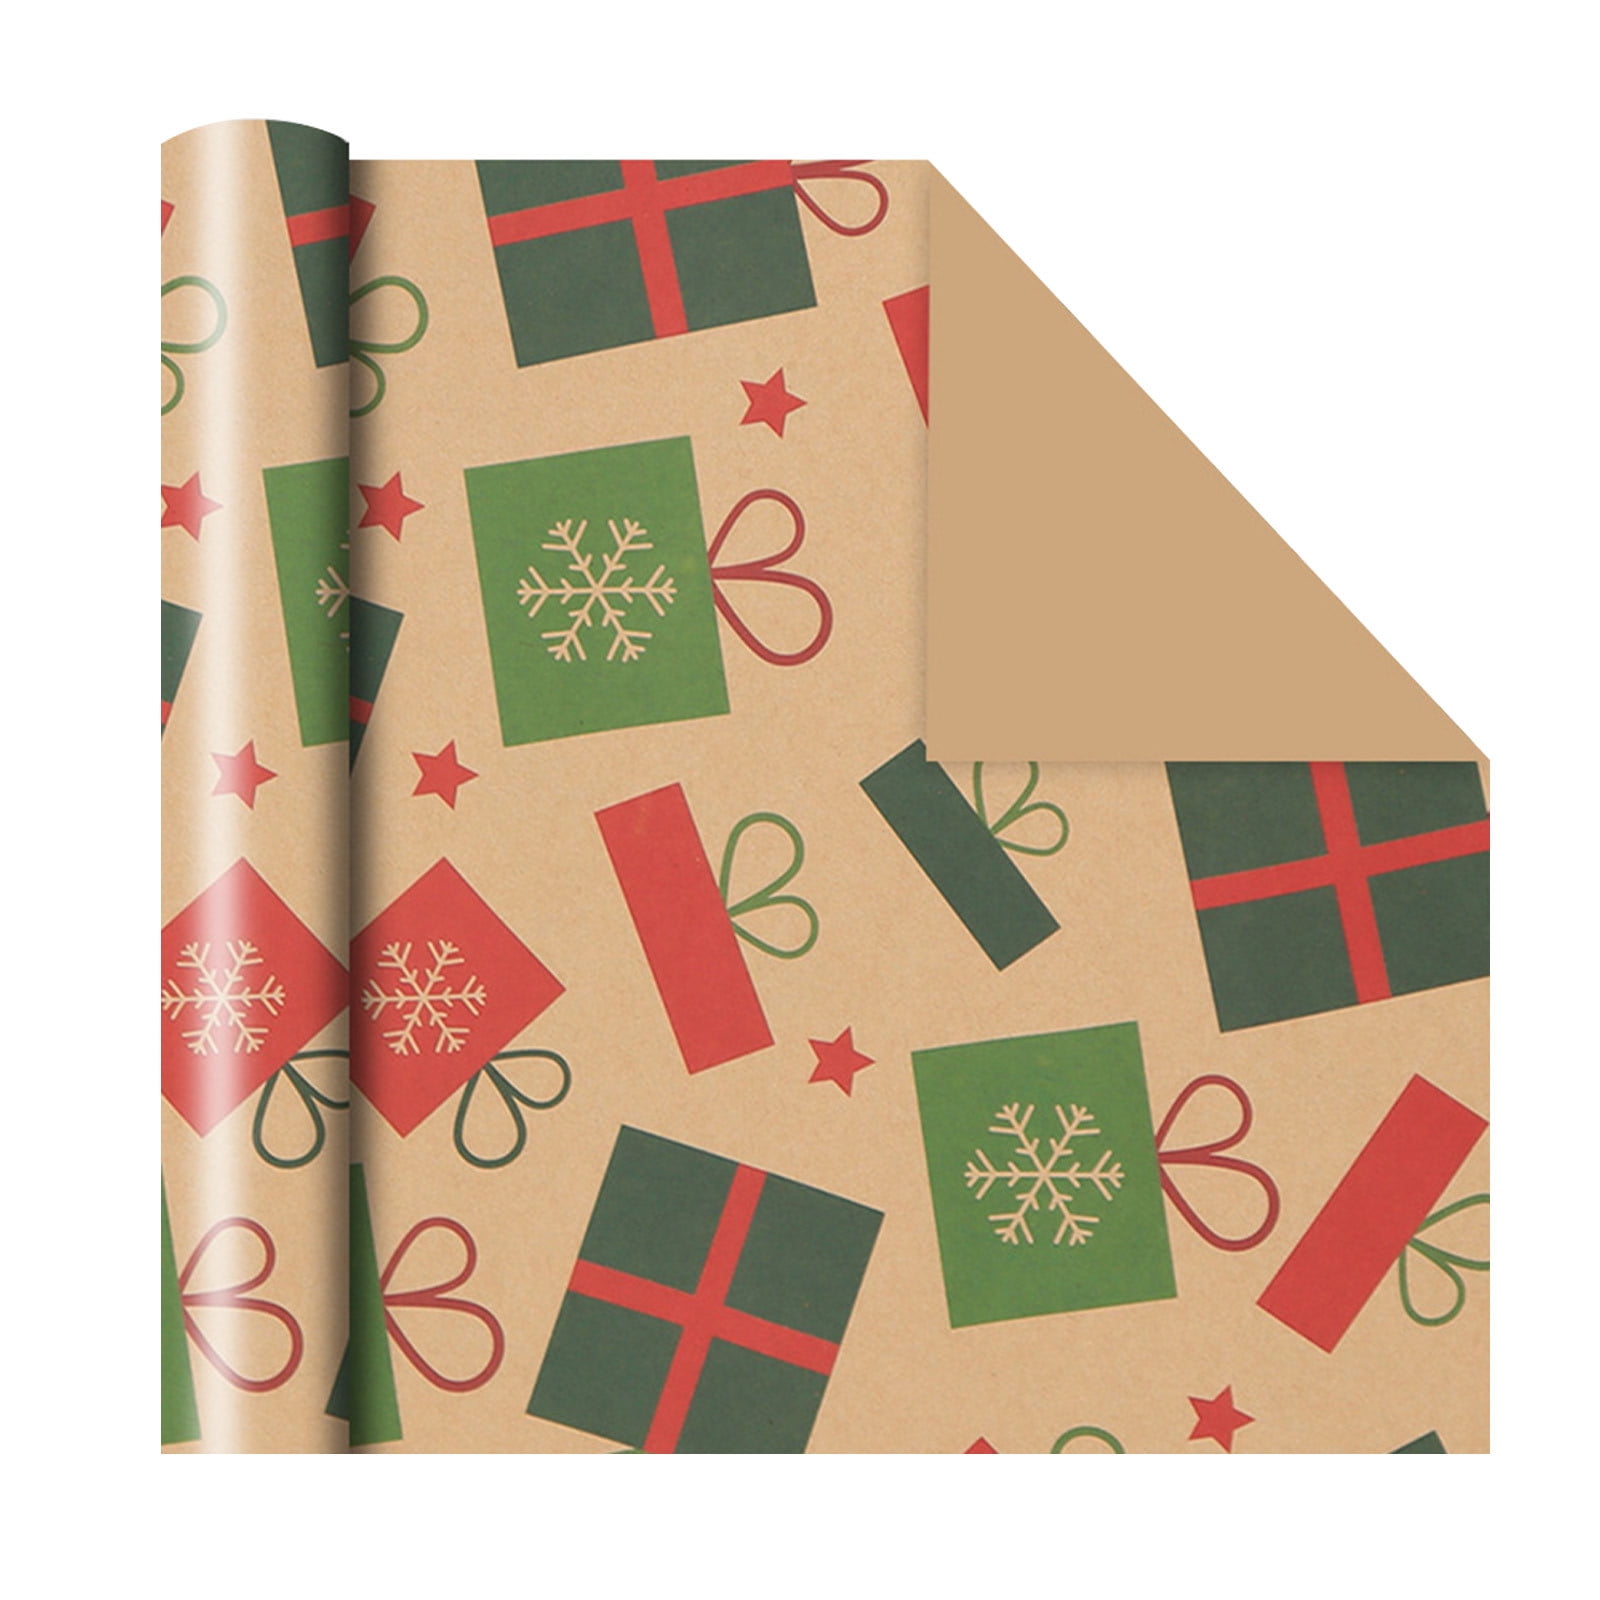 LSLJS Christmas Wrapping Paper Clearance, Christmas Gift Wrapping Paper,  Kraft Paper 20x 30 Folded Xmas Wrapping Paper Rolls for Gift Wrapping,  Book